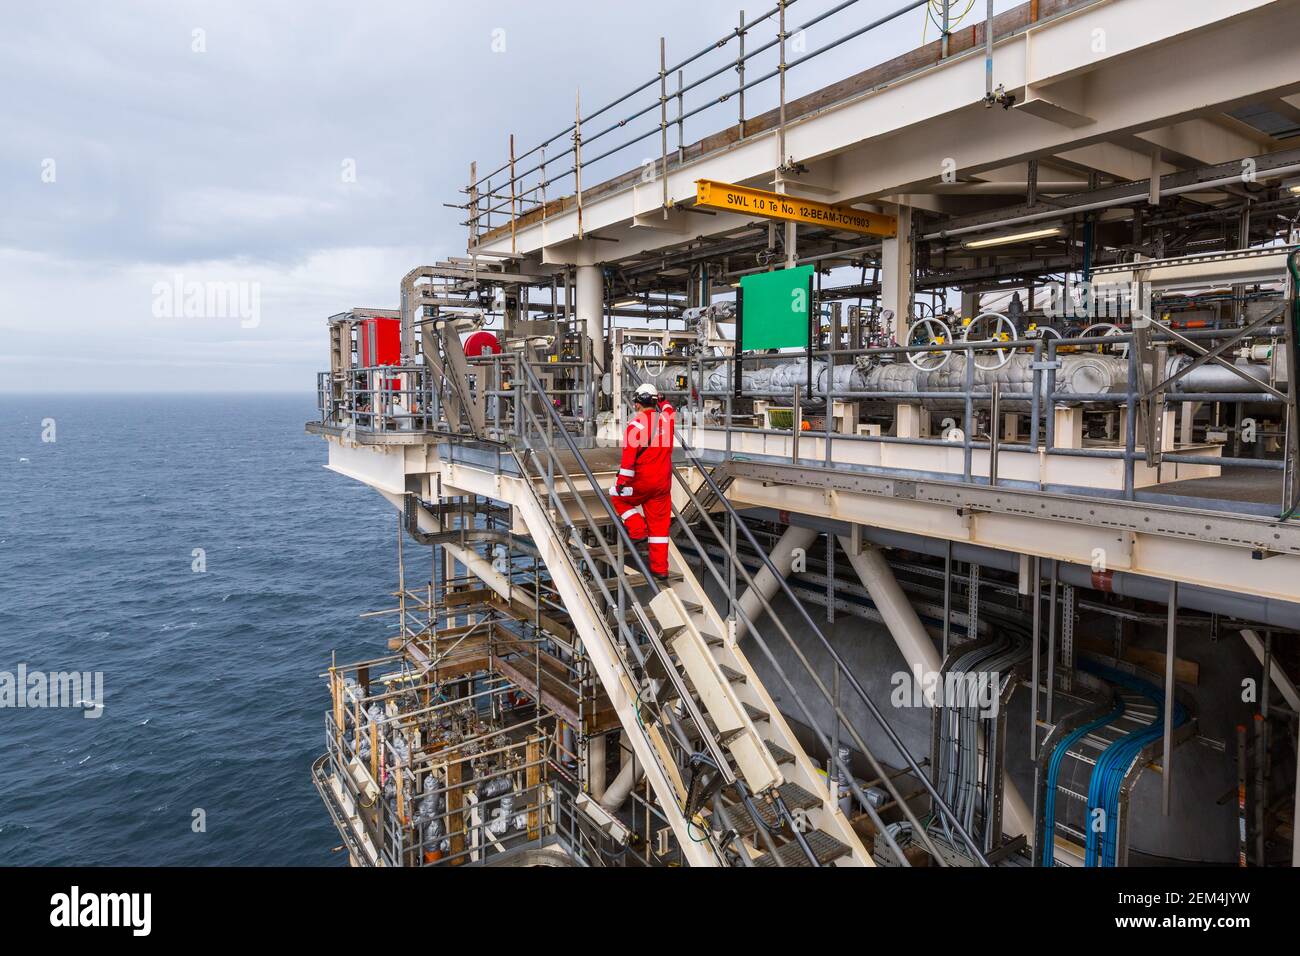 A worker walks up stairs on an offshore oil installation or rig Stock Photo